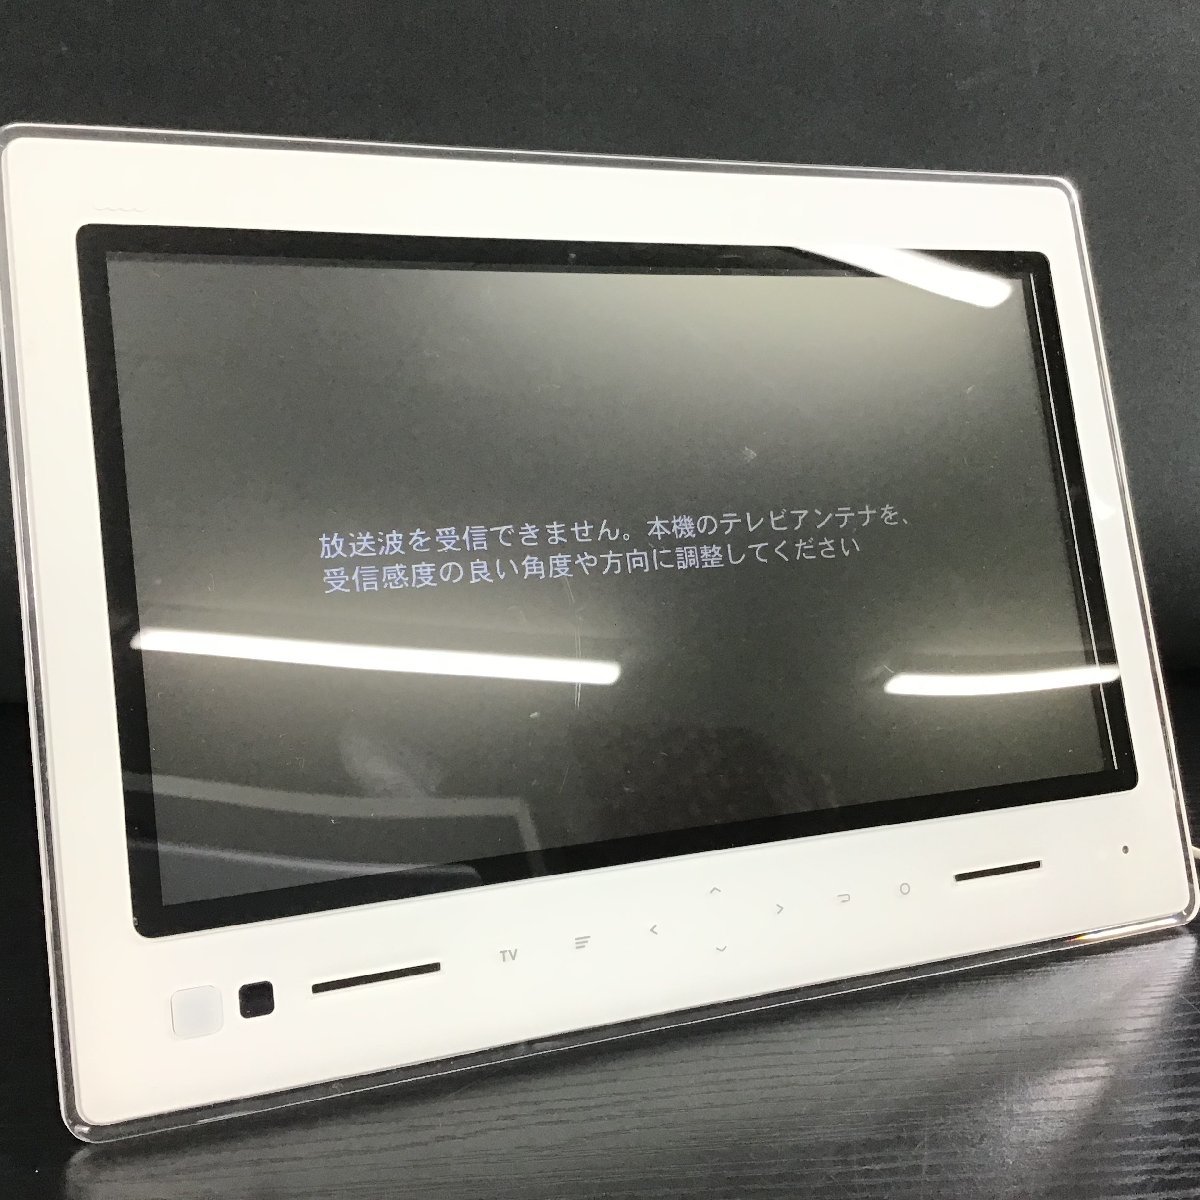 au PHOTO-U TV ZTS11SWA Full seg * portable tv with function photo frame * beautiful goods ** electrification verification settled *[ including in a package un- possible / consumer electronics kind selling out /01-237]